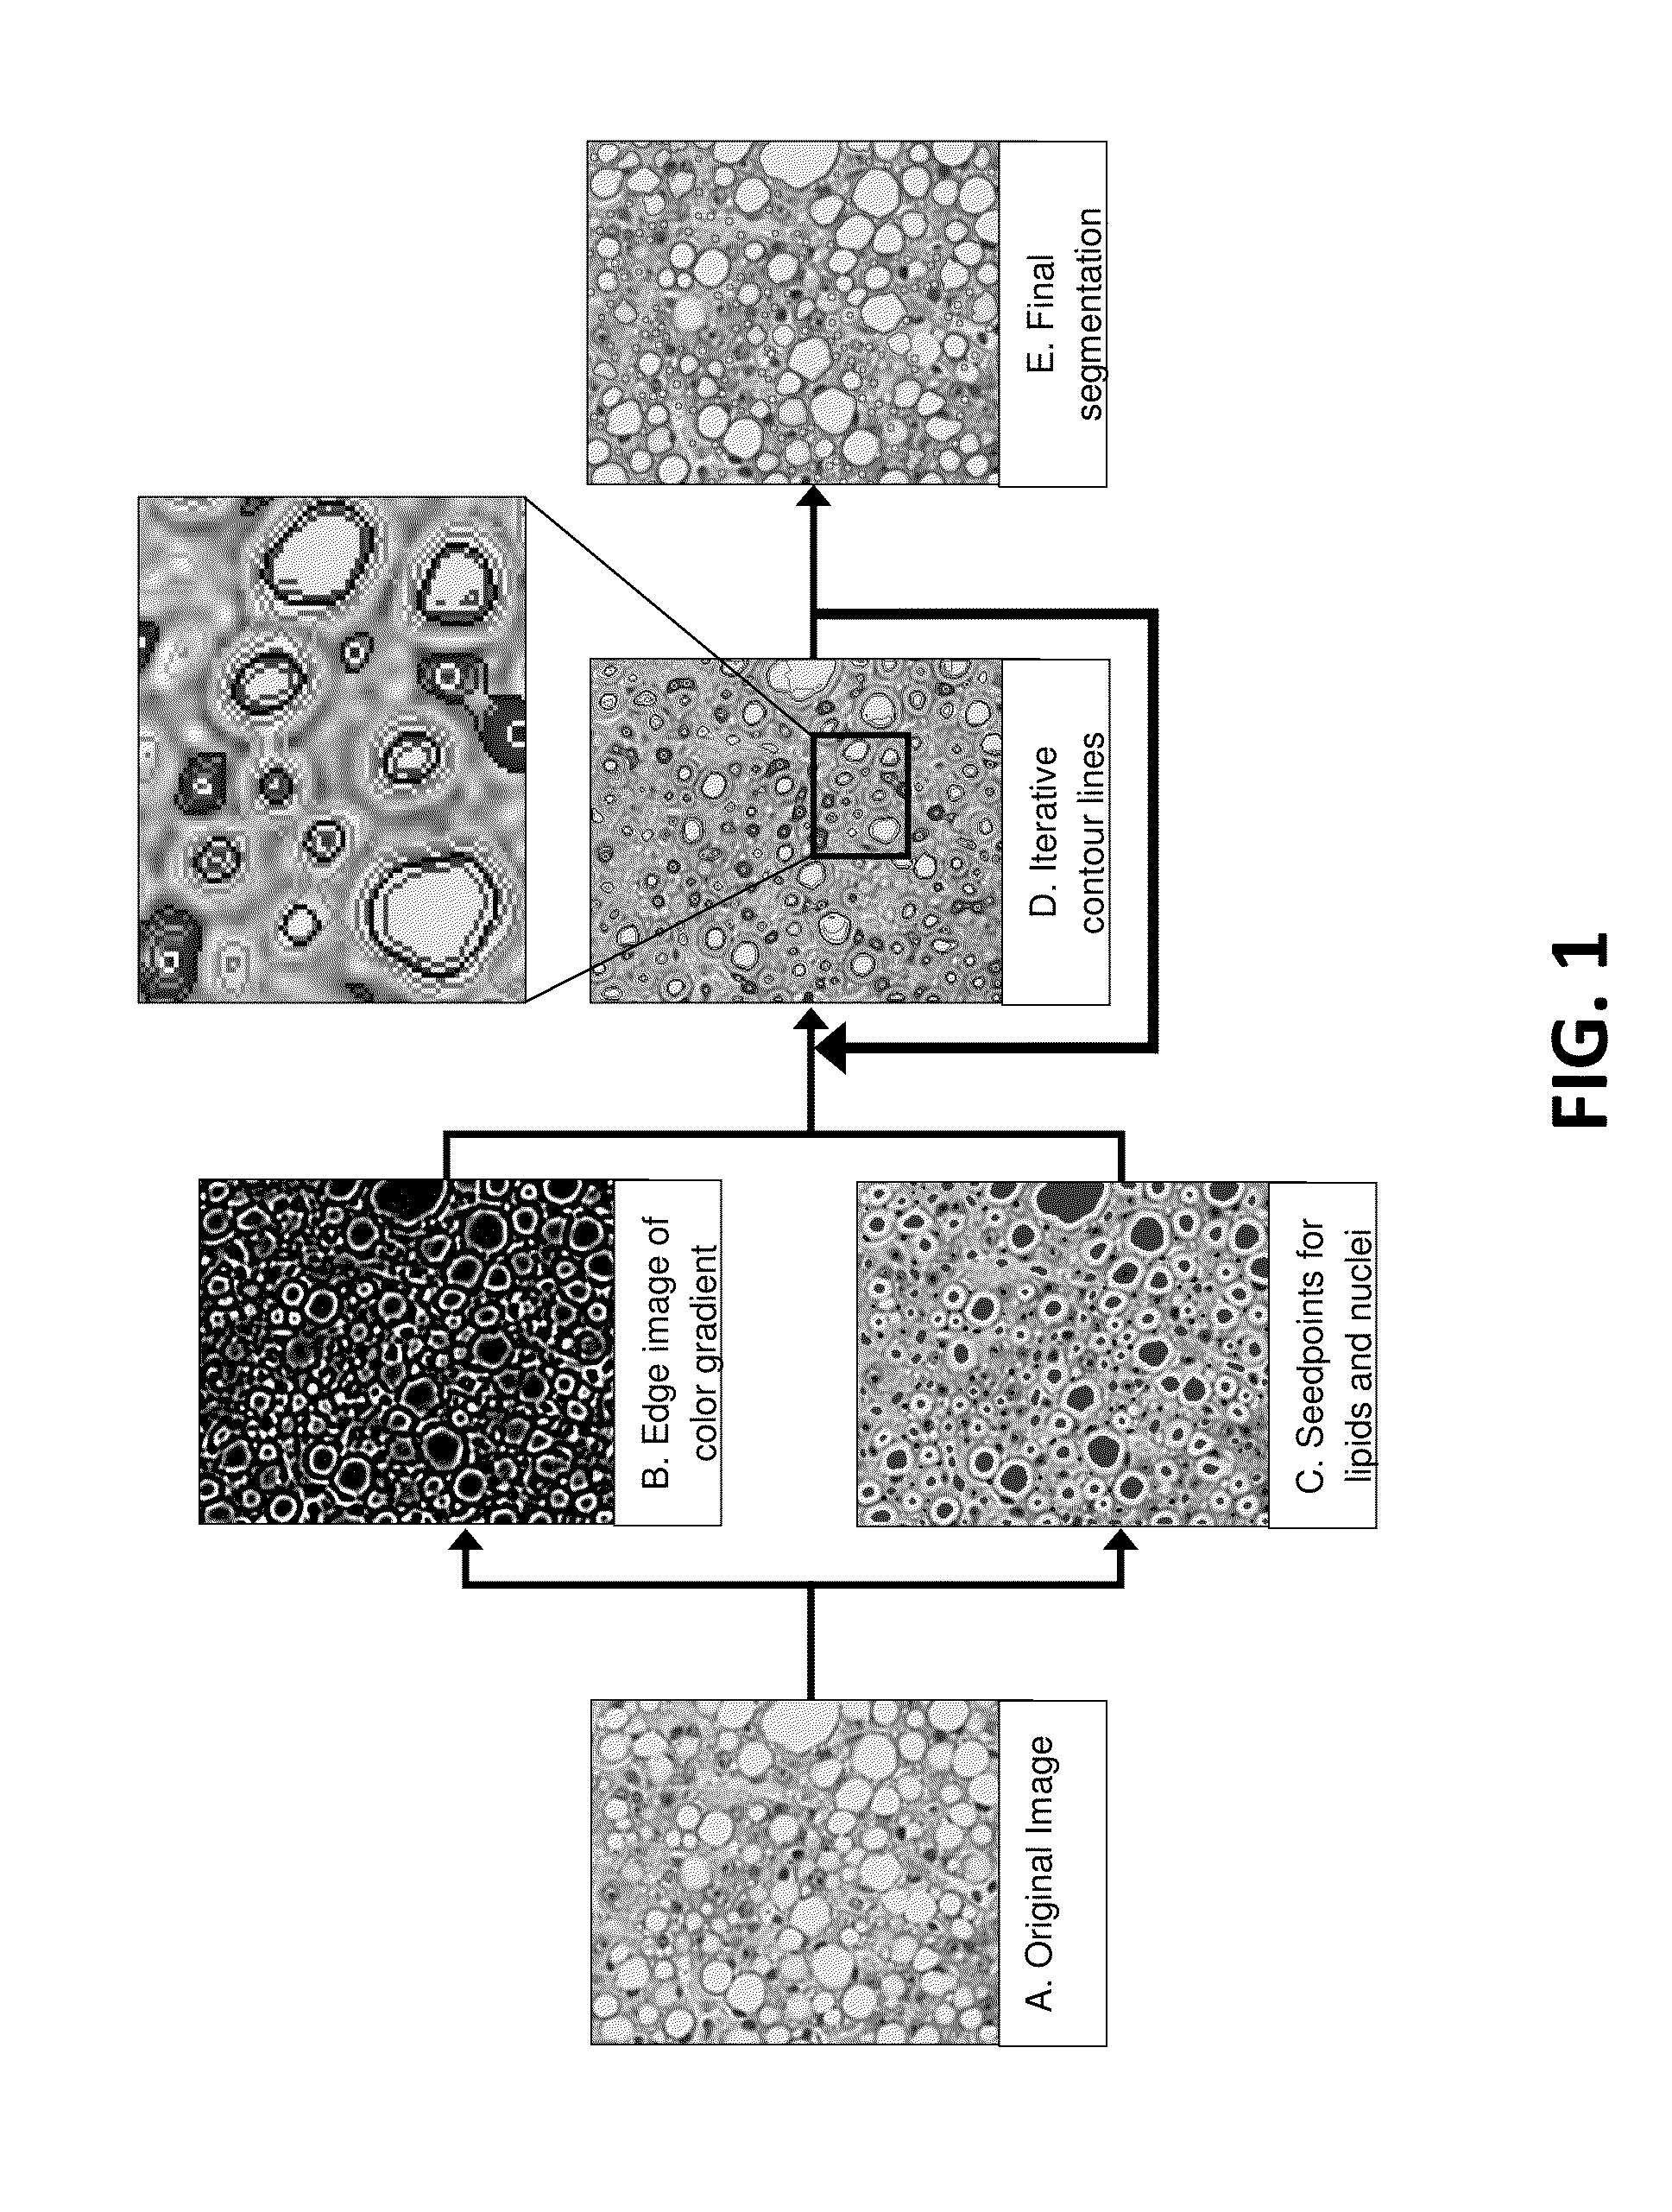 Automated high-content image analysis system and methods and uses thereof